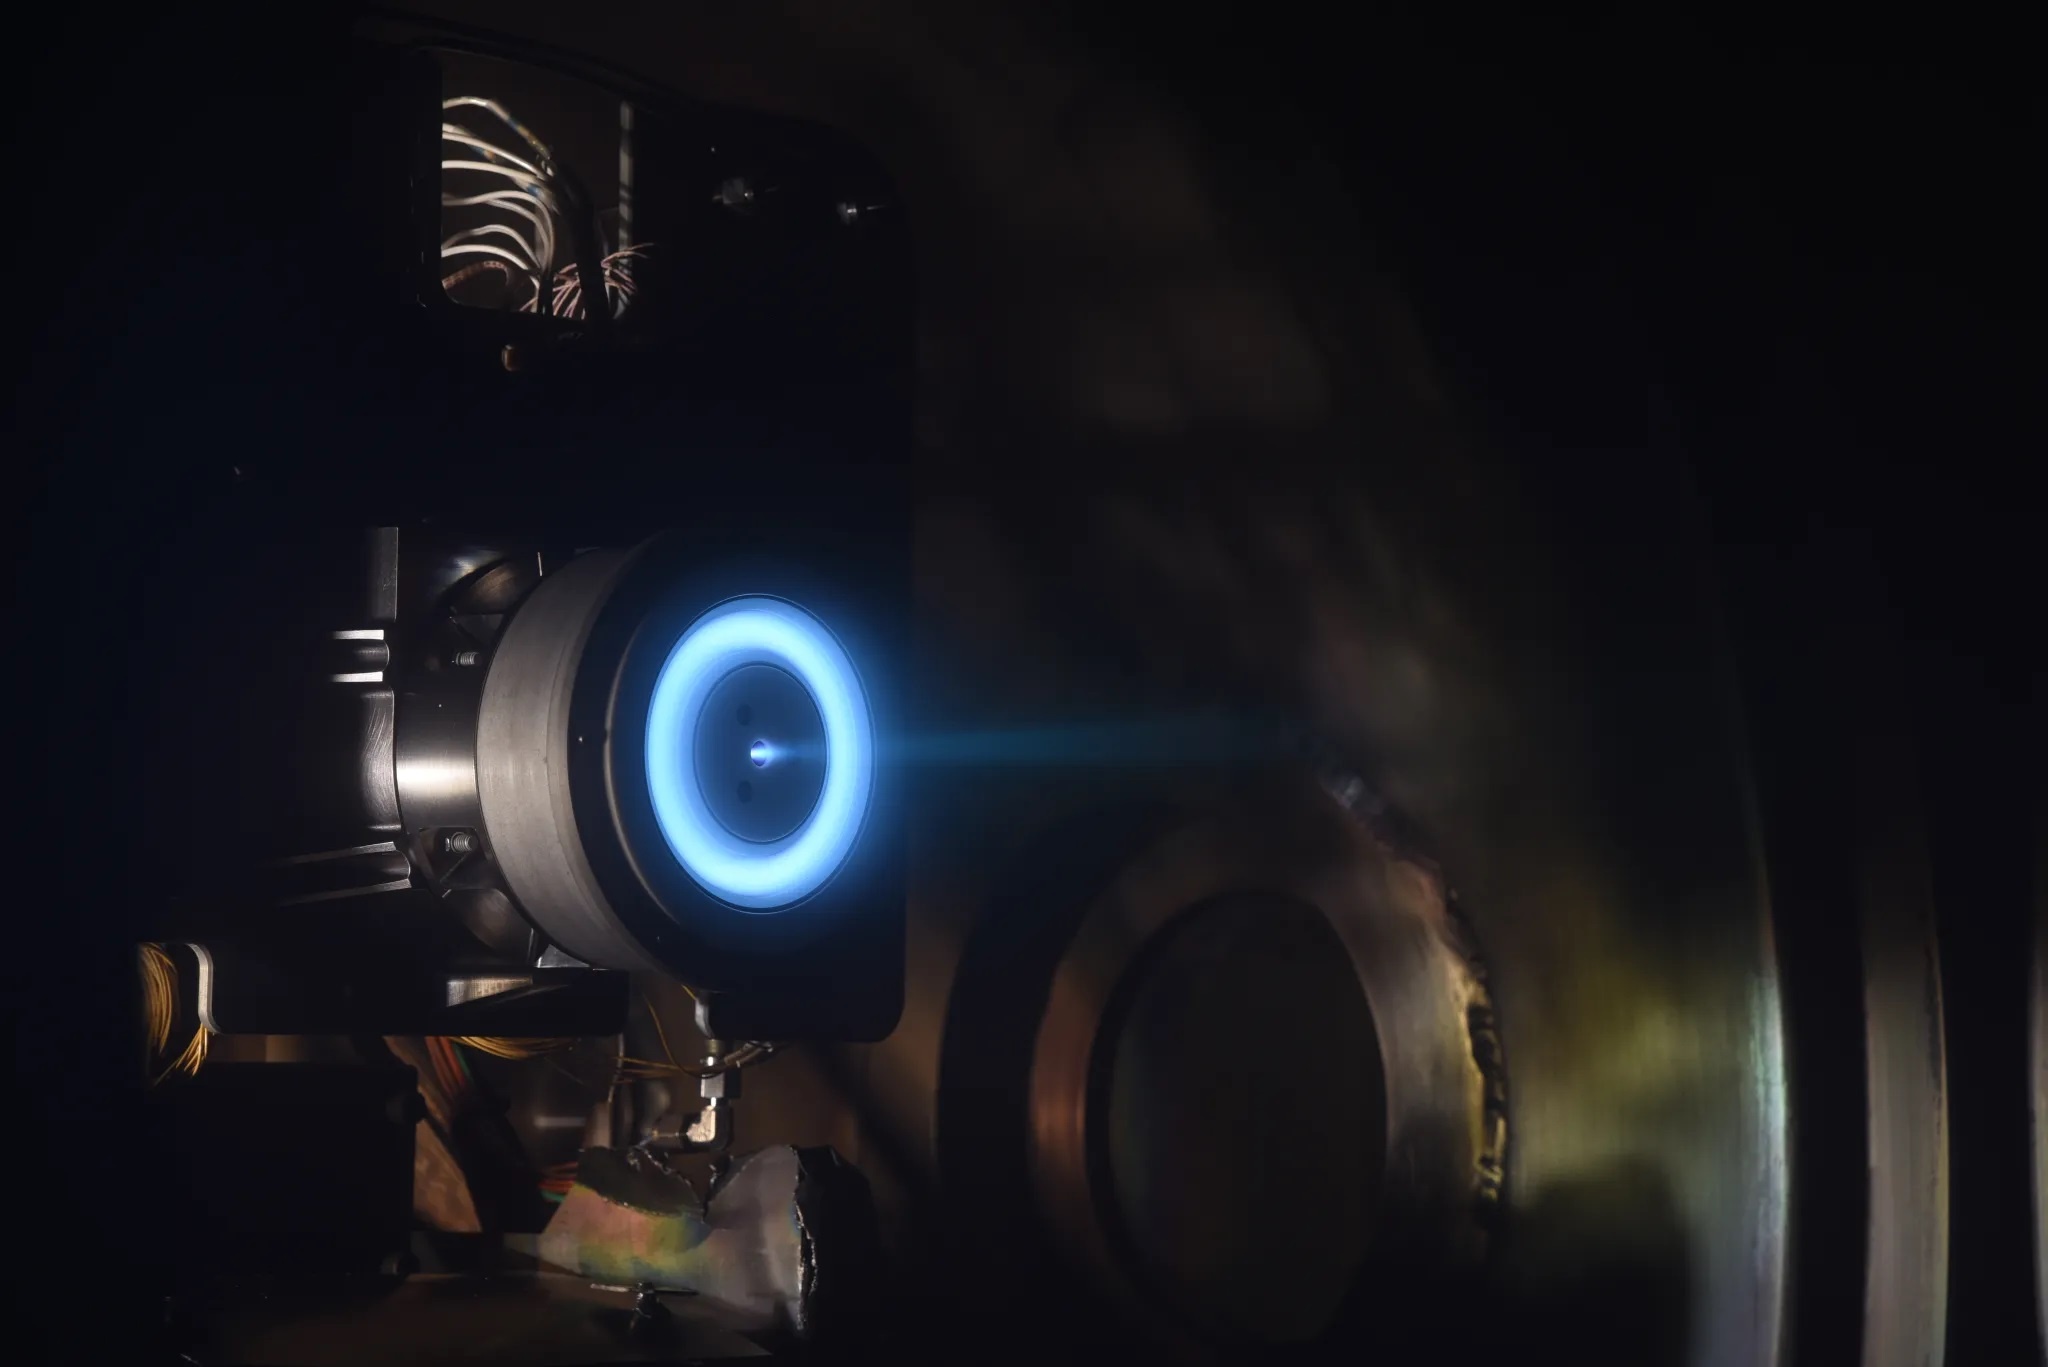 Next Generation Ion Engines Will Be Extremely Powerful